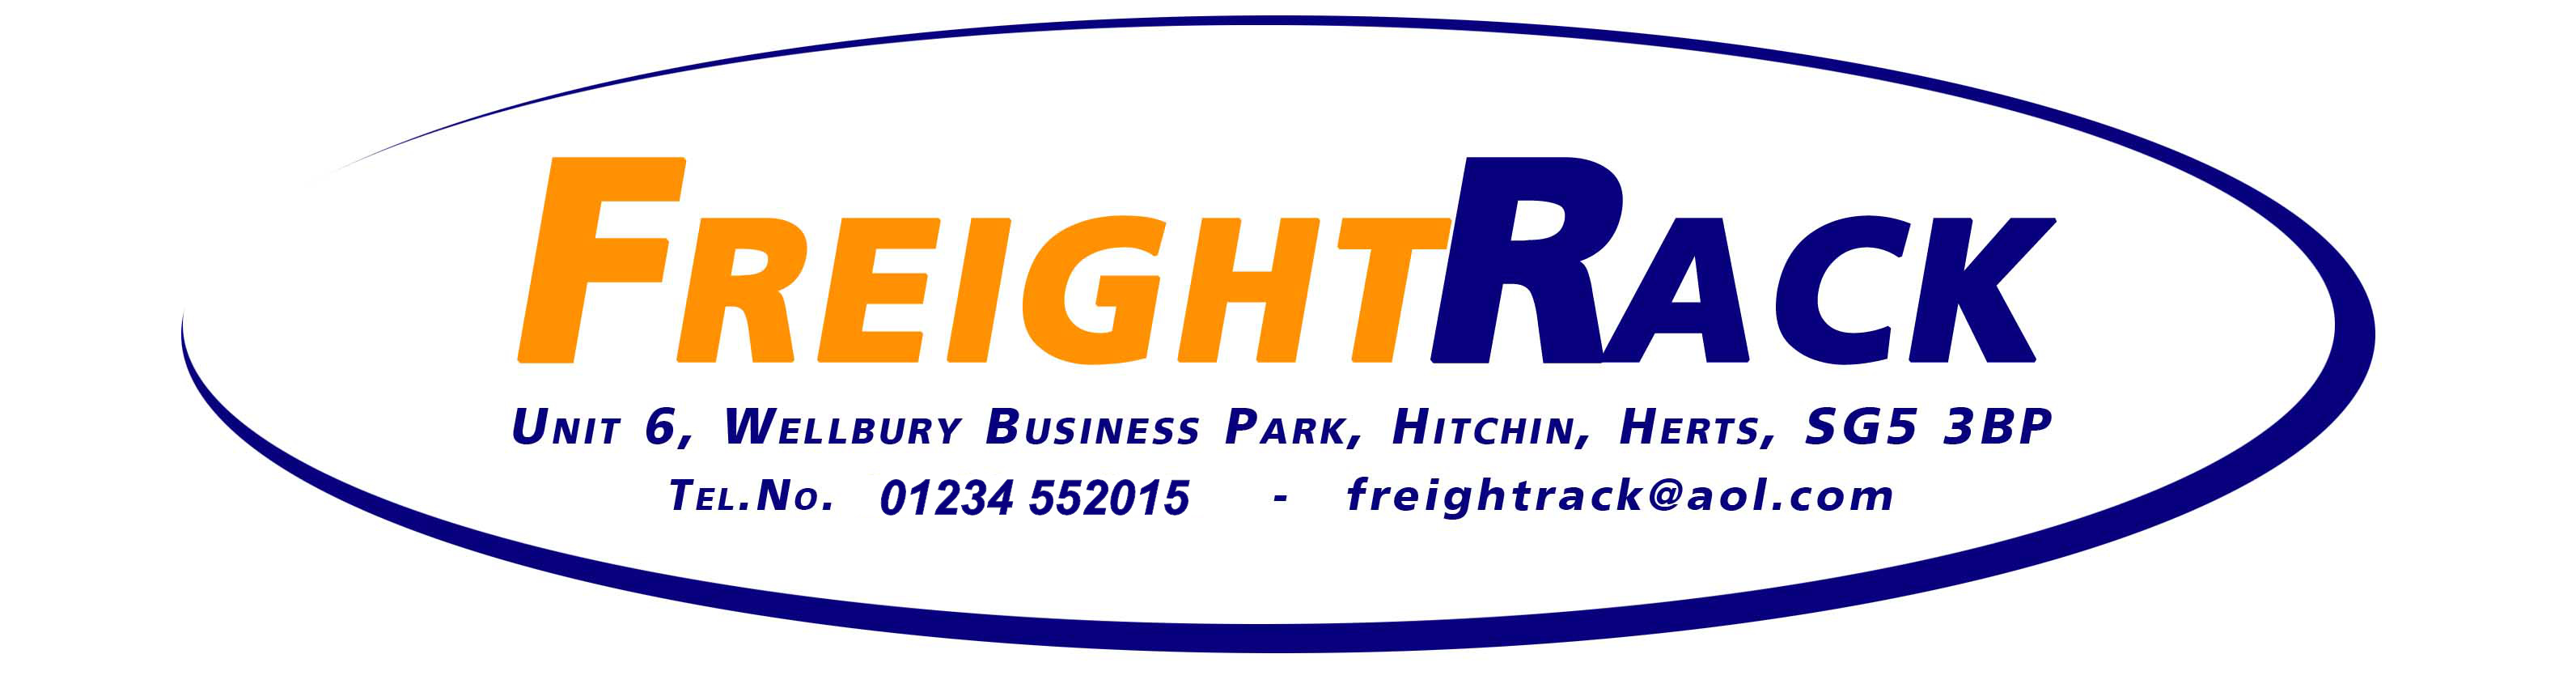 Freight rack banner with address